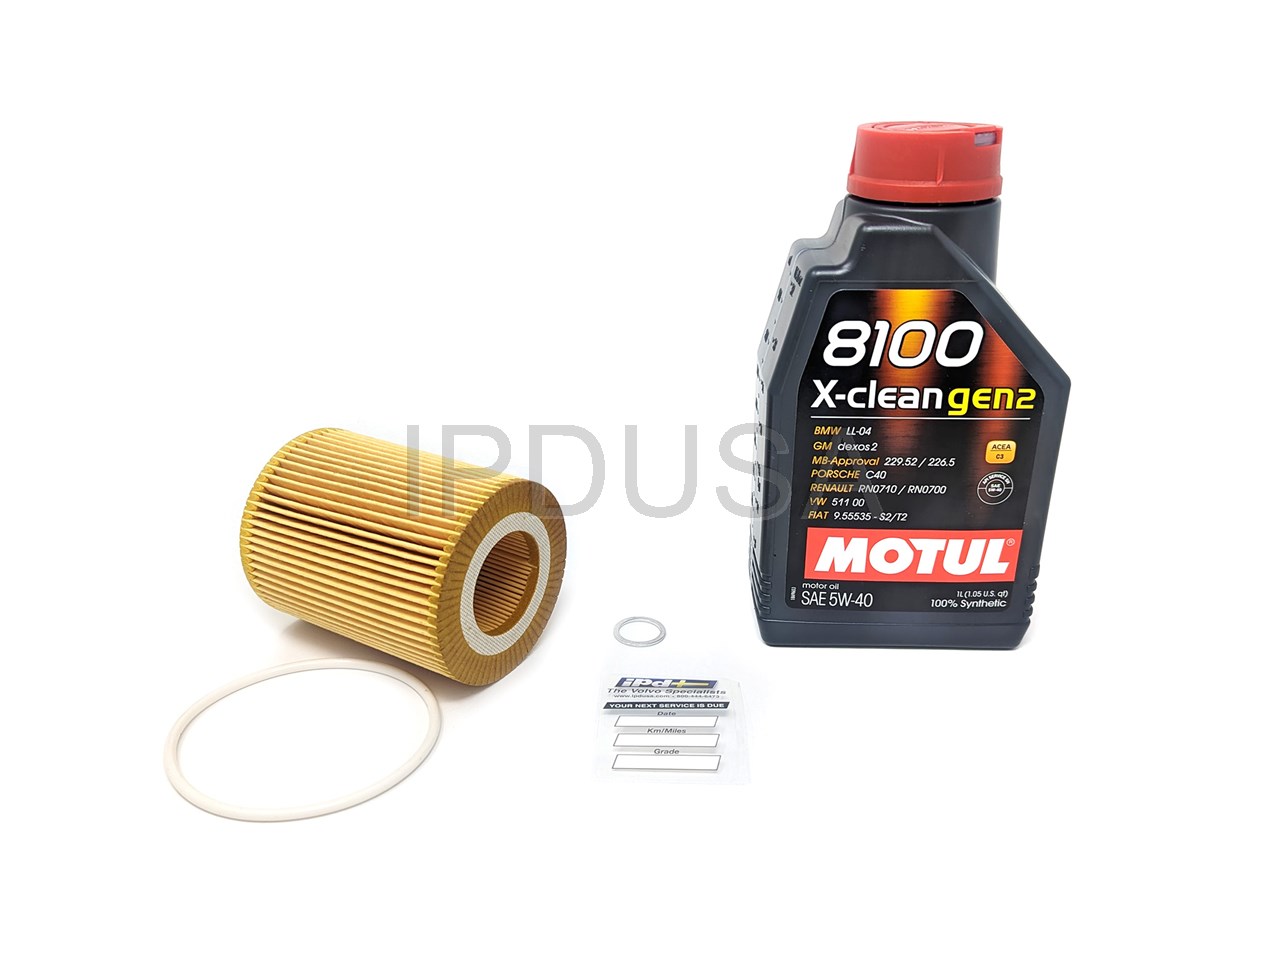 Motul 8100 X-clean 5W40 Synthetic Oil 5 Liters 102051 | High Performance  Engine Oil